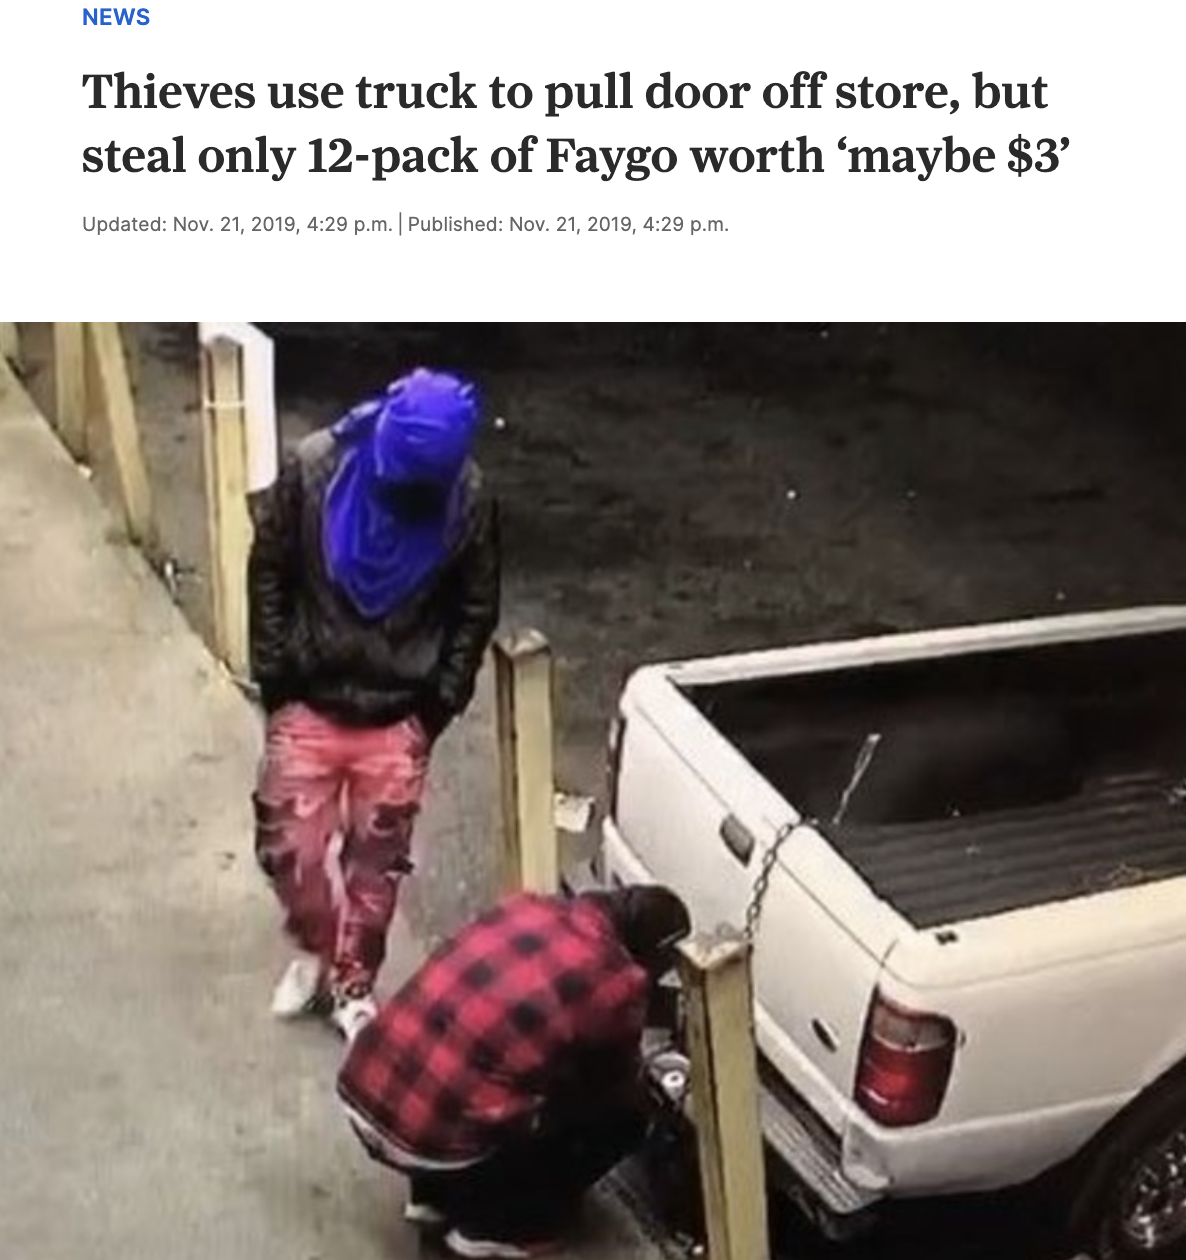 pickup truck - News Thieves use truck to pull door off store, but steal only 12pack of Faygo worth 'maybe $3' Updated Nov. 21, 2019, p.m. Published Nov. 21, 2019, p.m.